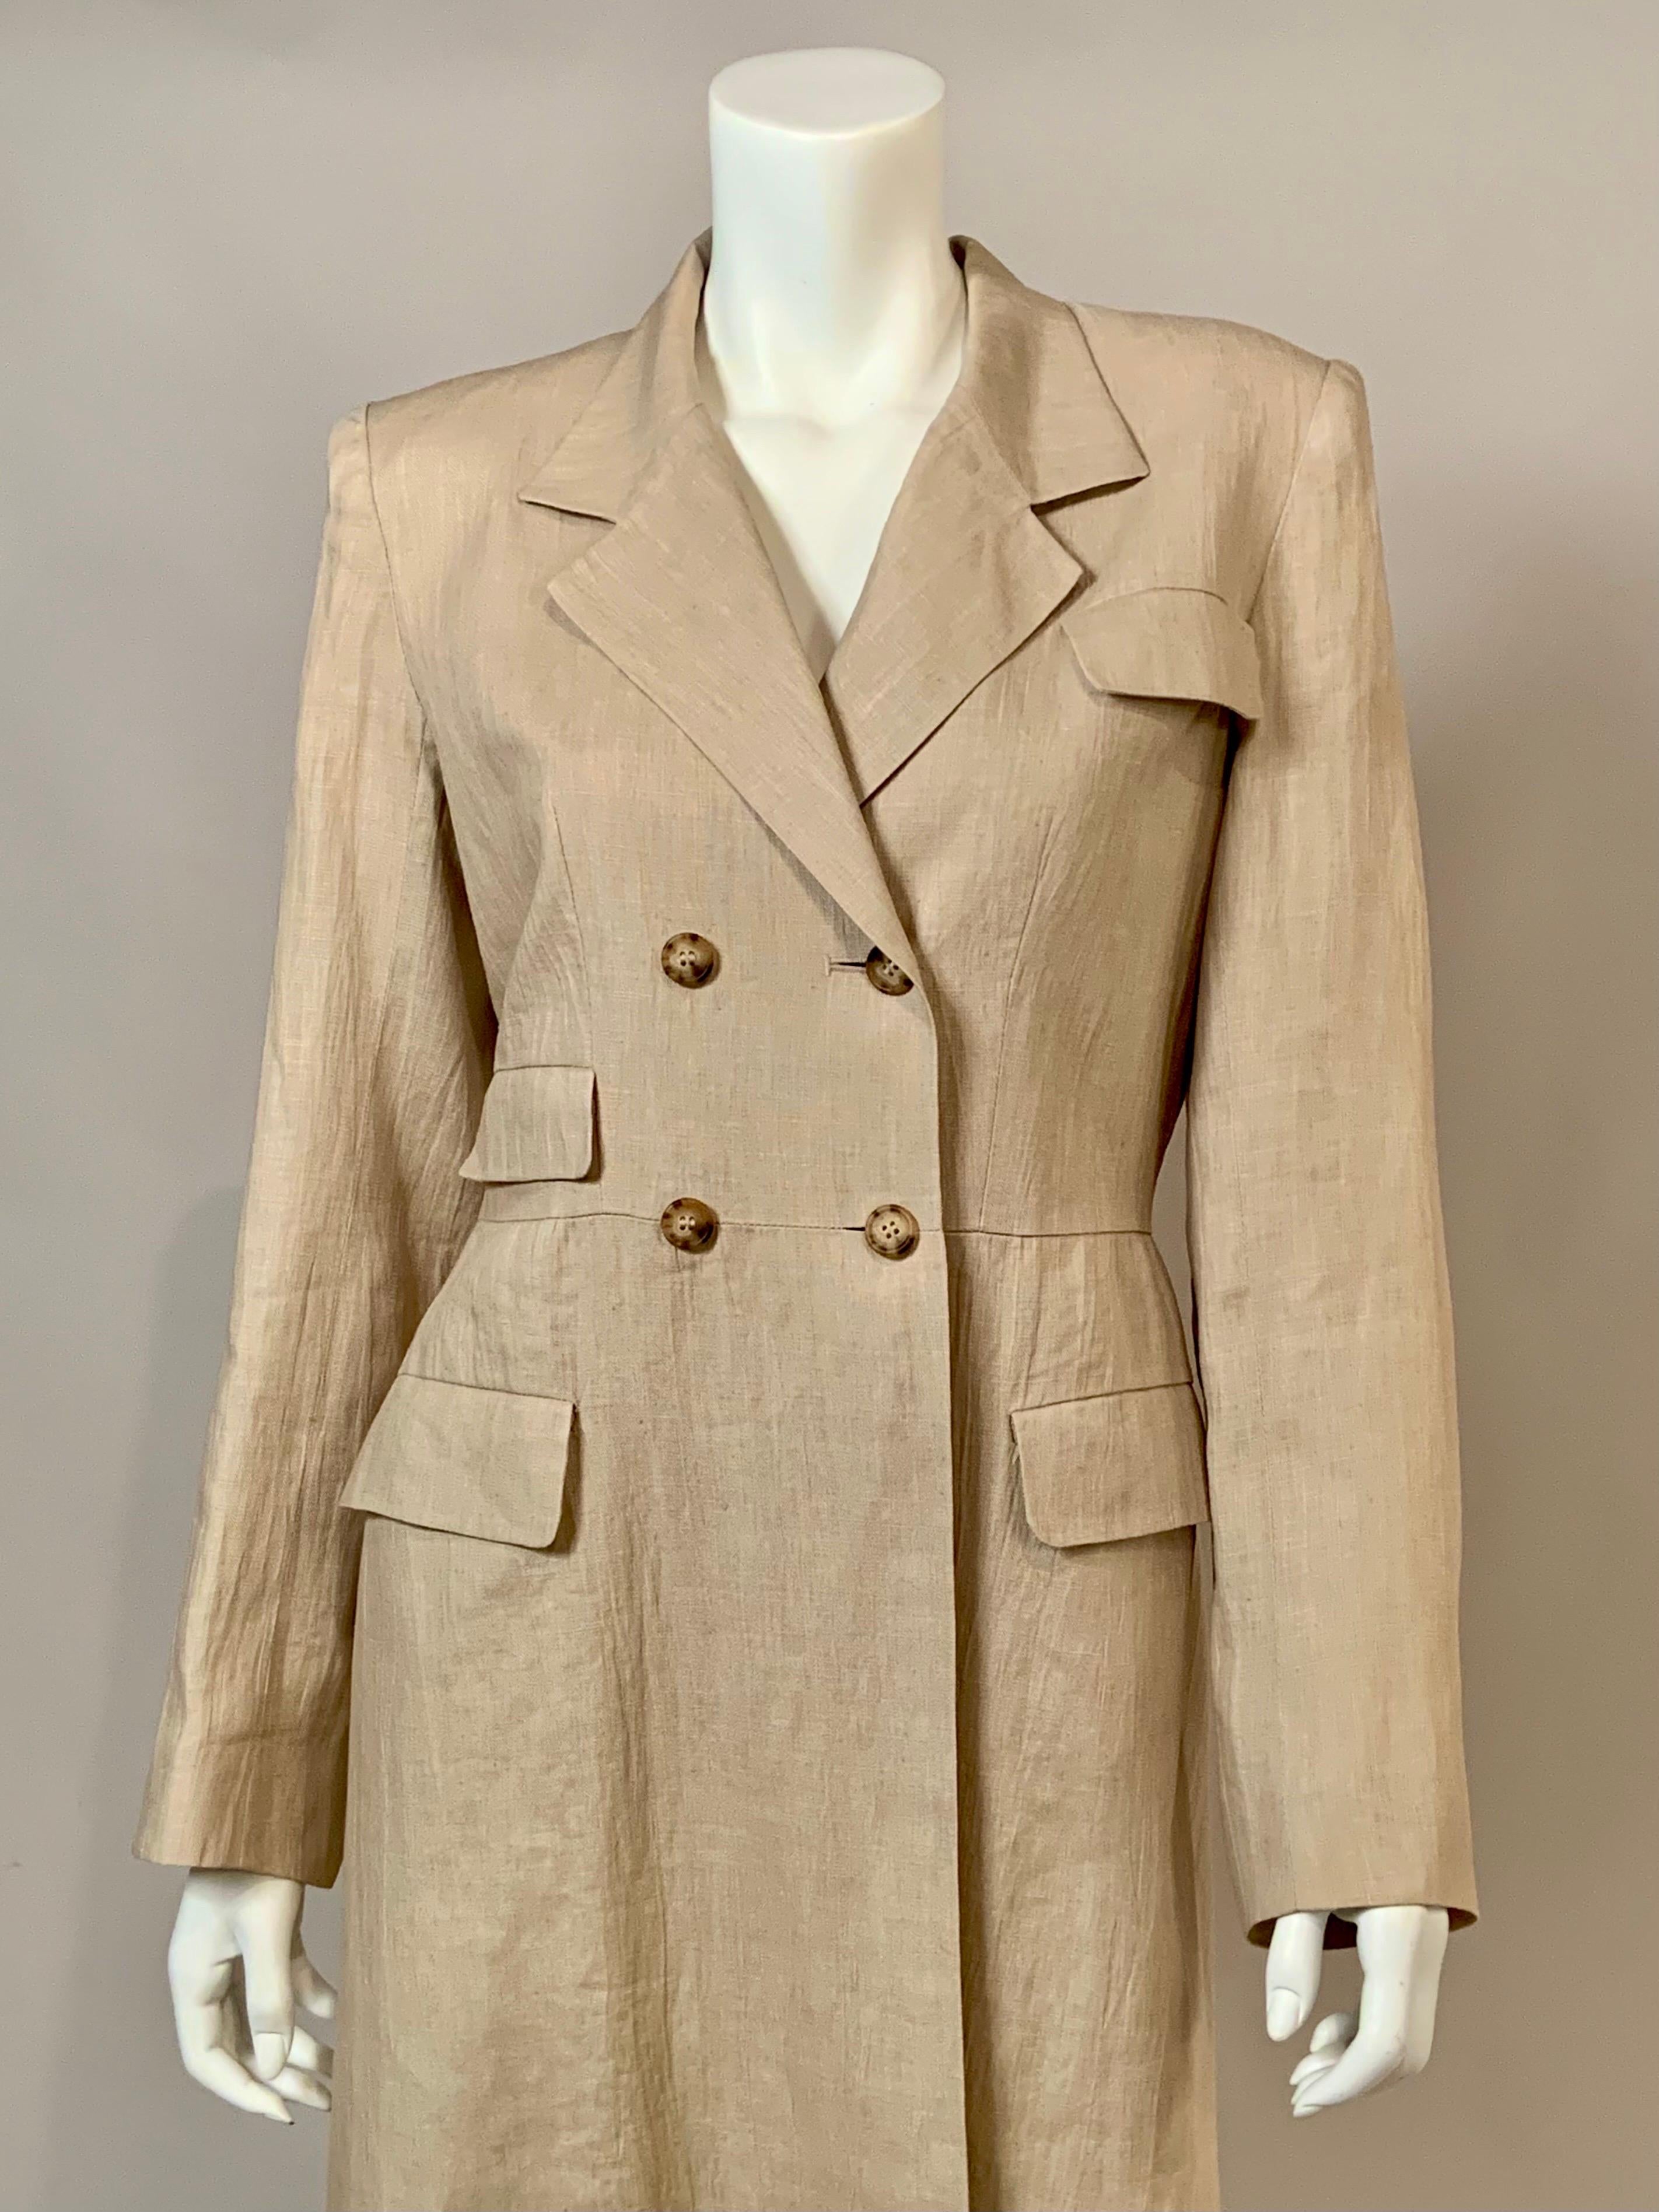 This Irish made Irish Linen duster coat by Willis & Geiger is so beautifully tailored.  It has a notched lapel, a left side breast pocket, a right side waist pocket and two pockets on the hip.  There are four horn buttons on the front of the duster